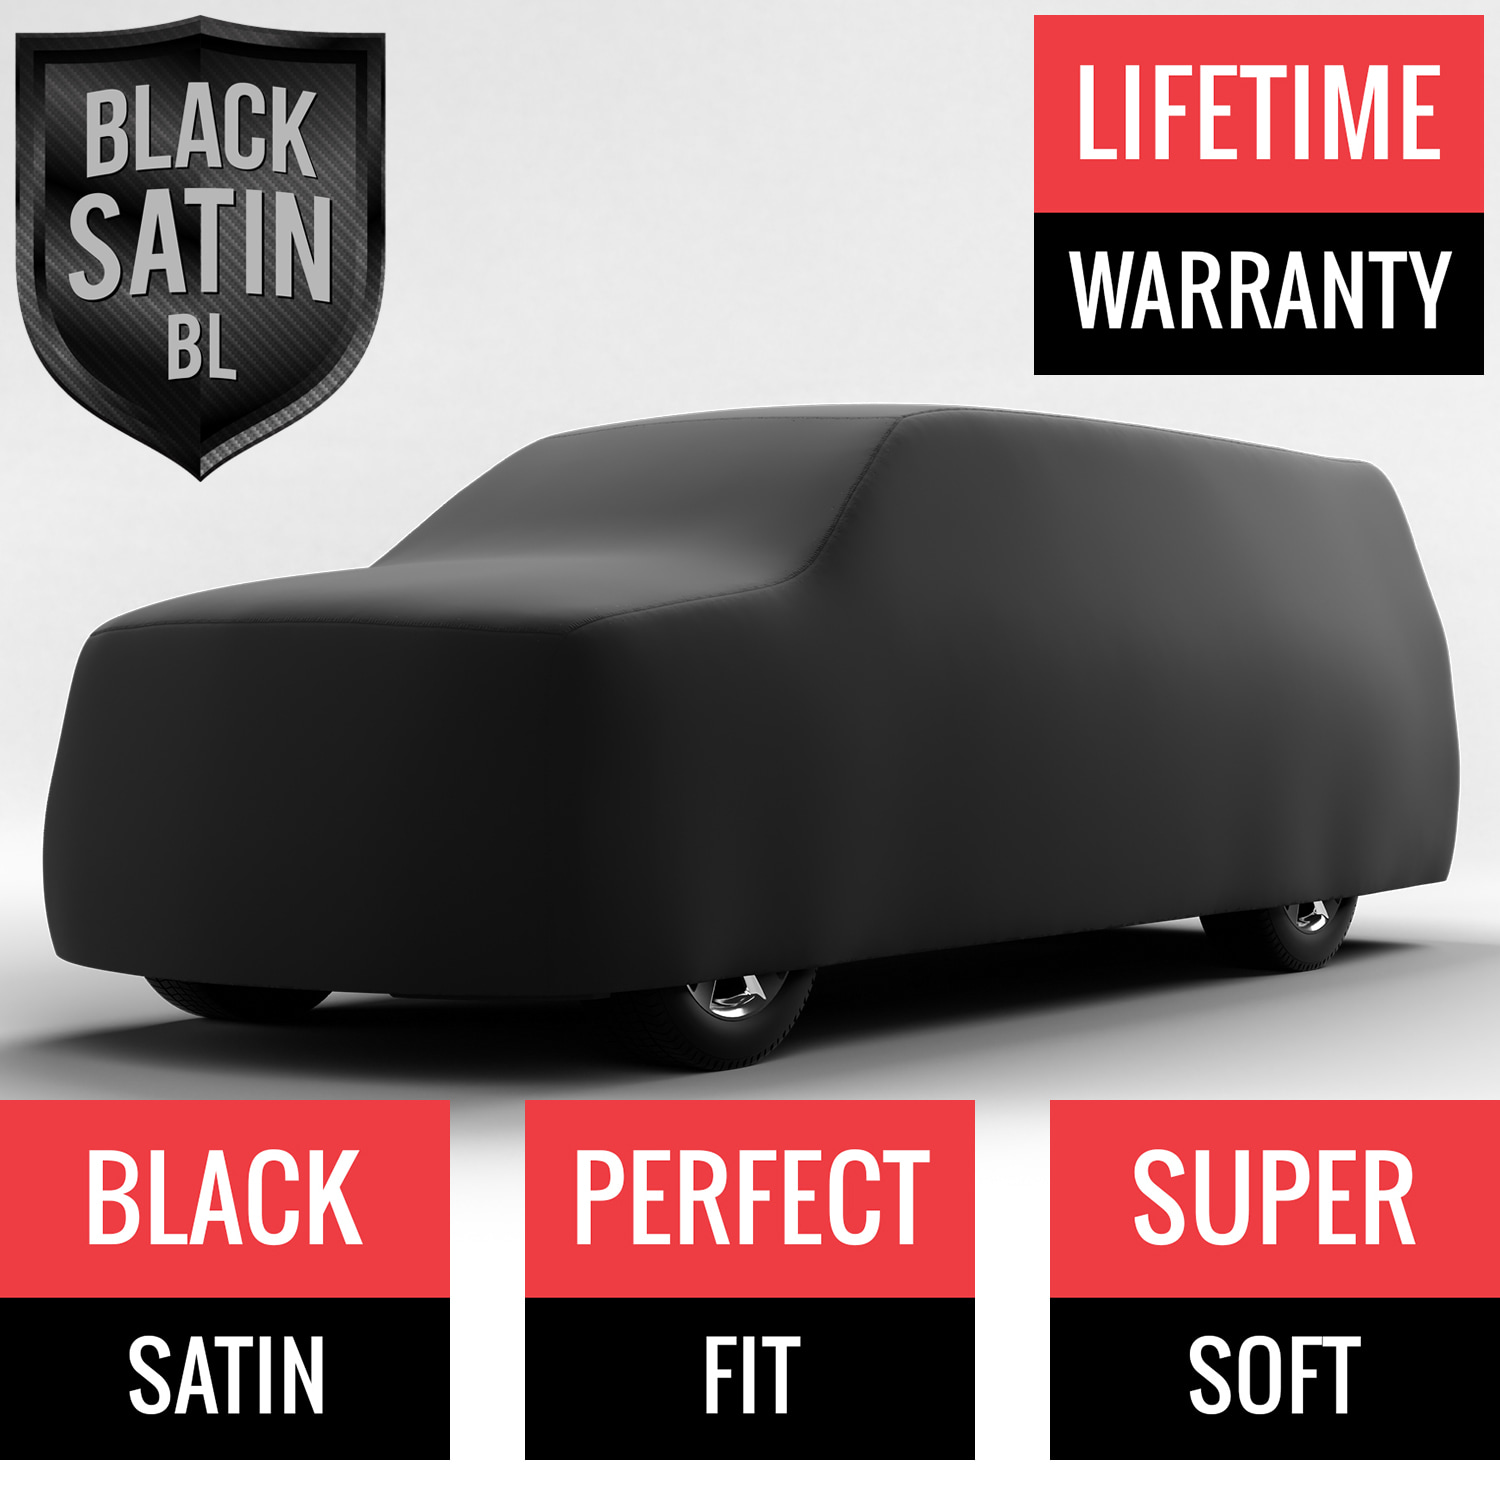 Black Satin BL - Black Car Cover for GMC C1500 1998 Regular Cab Pickup 6.5 Feet Bed with Camper Shell